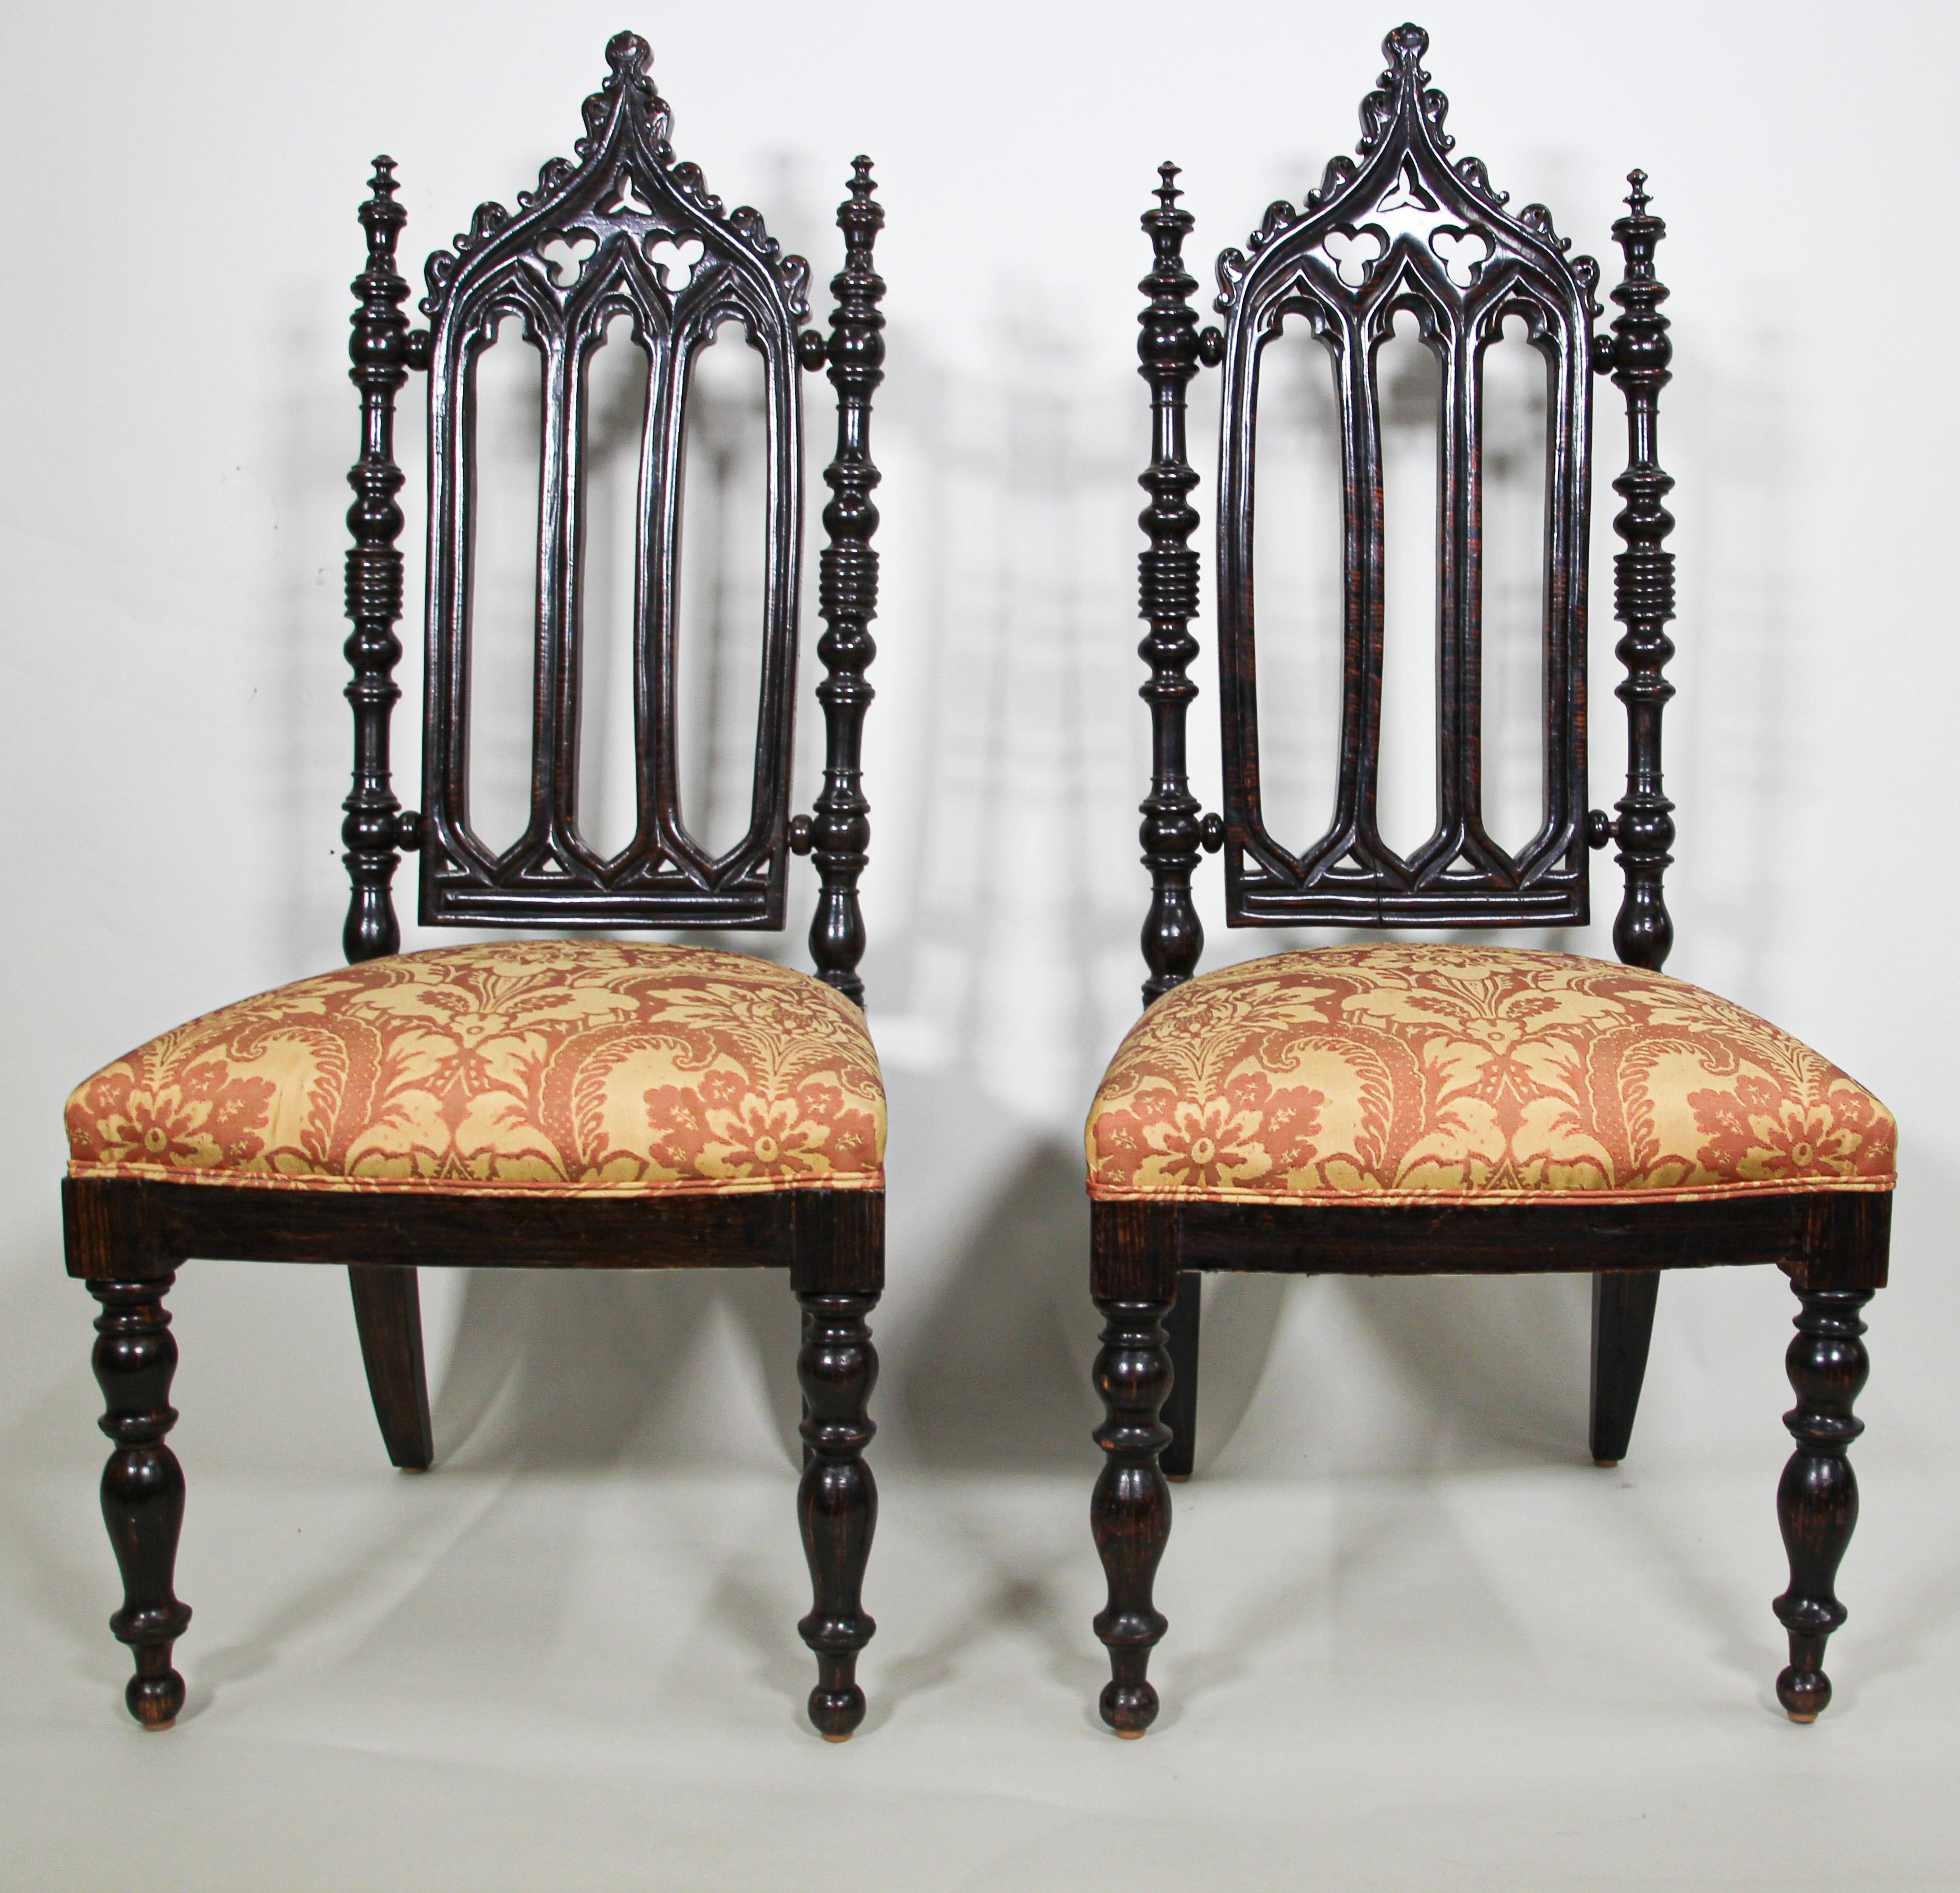 Beautiful Spanish Moorish Revival chairs with hand carved wood Gothic details.
Accent any setting with this unique hall chairs.
Pair of Spanish High back Jacobean Renaissance English Revival Gothic Hall Prayer Chairs.
Turned wood feet.